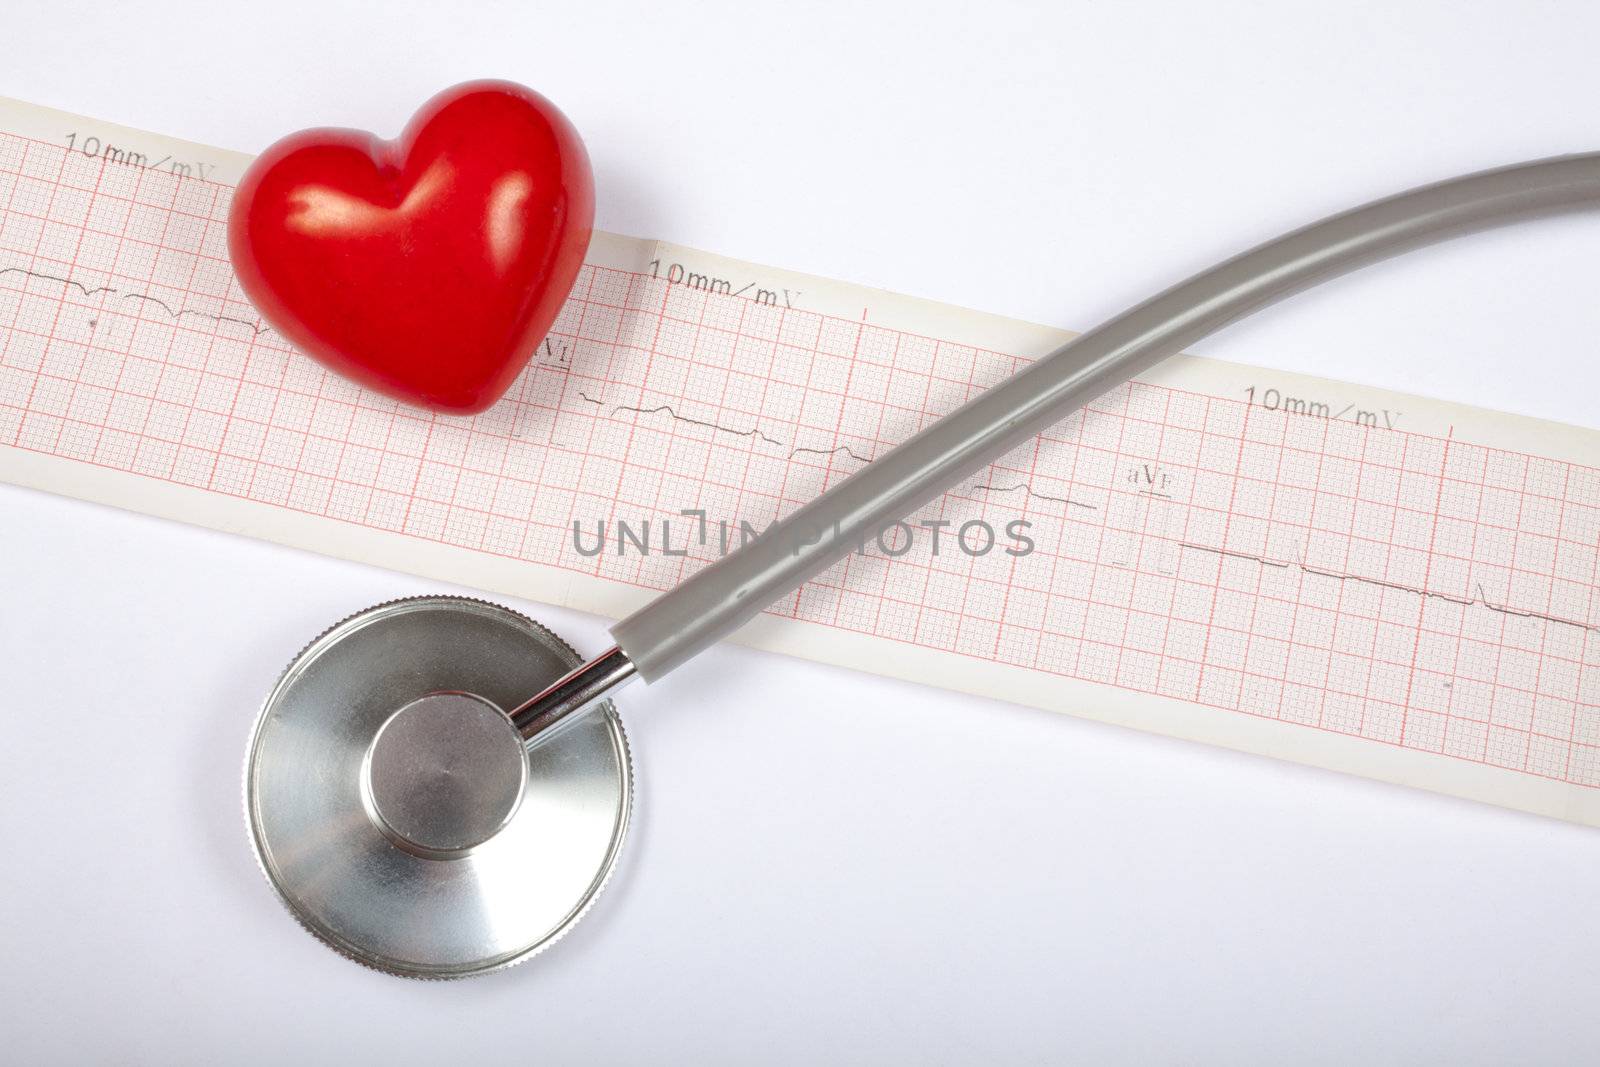 Stethoscope, red heart and cardiogram by Portokalis